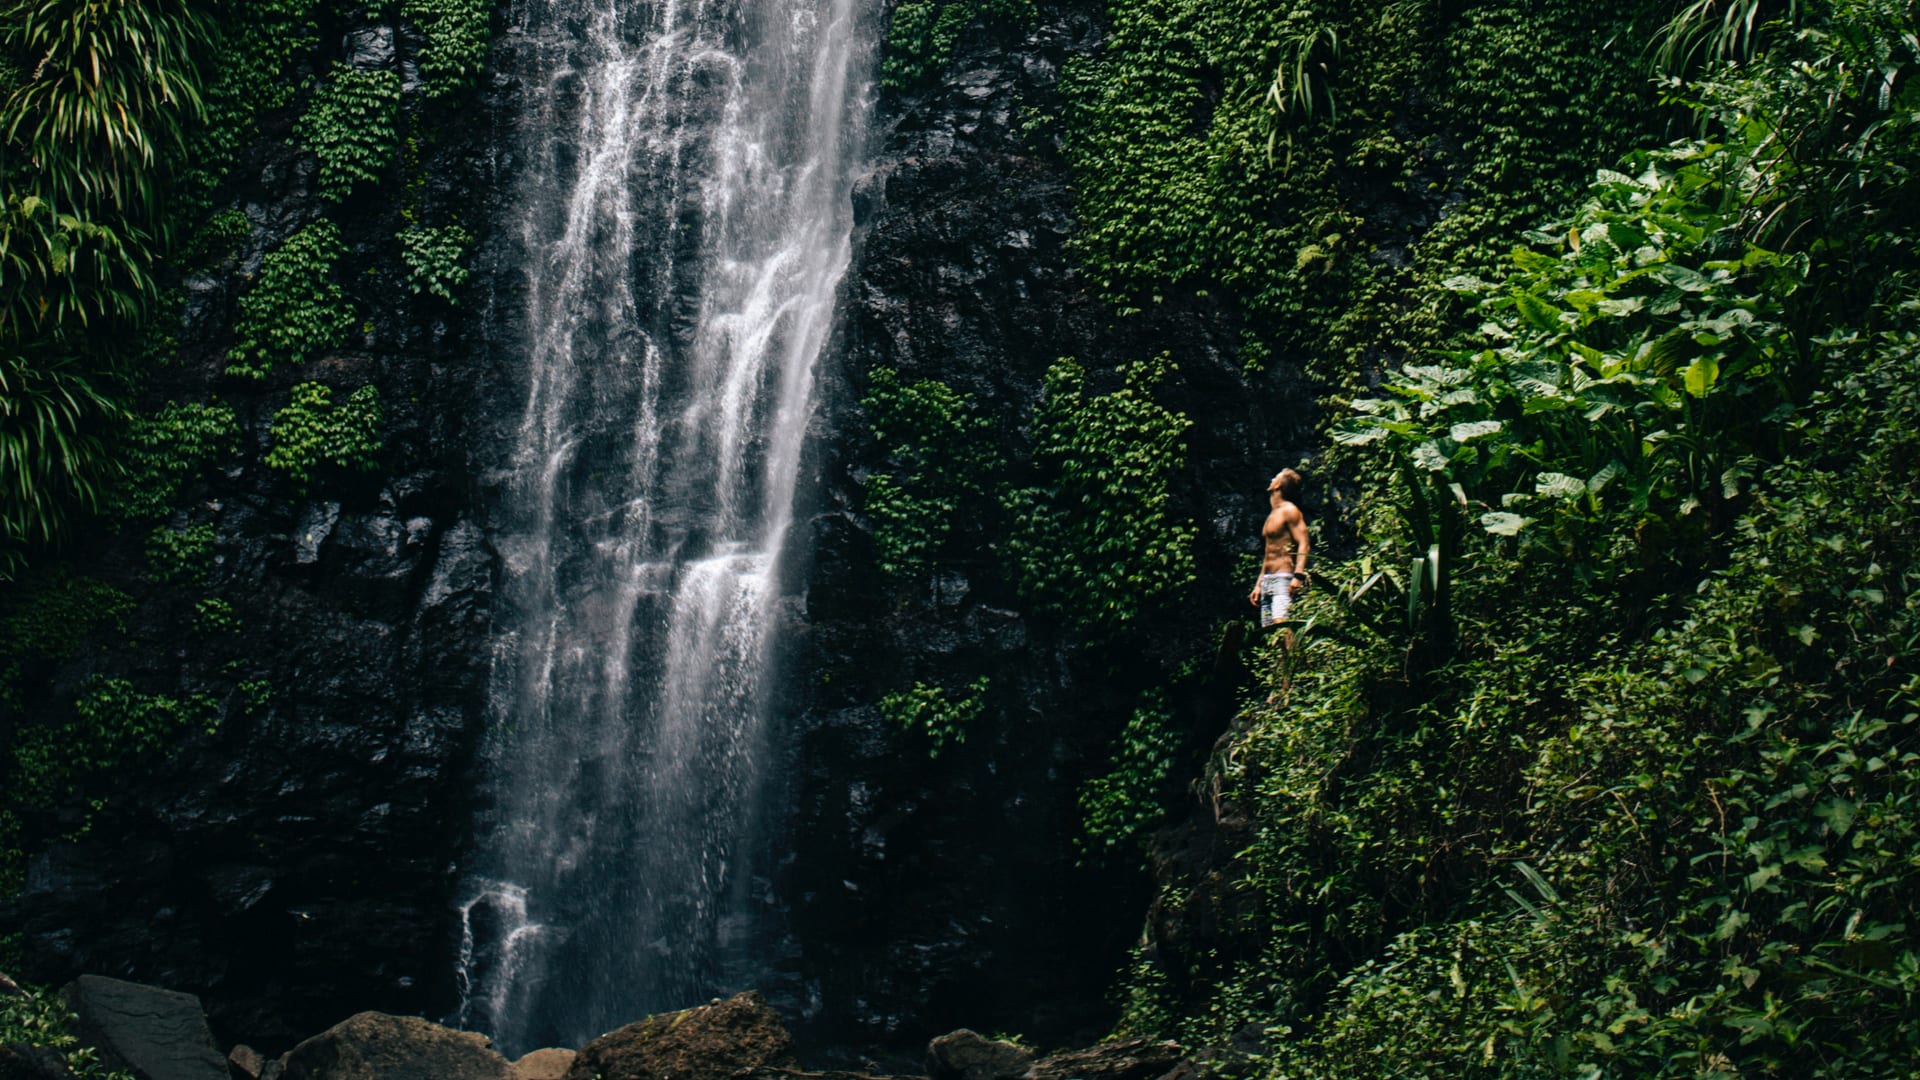 Visit Australia for: A man ready to swim near a waterfall in the Daintree Rainforest